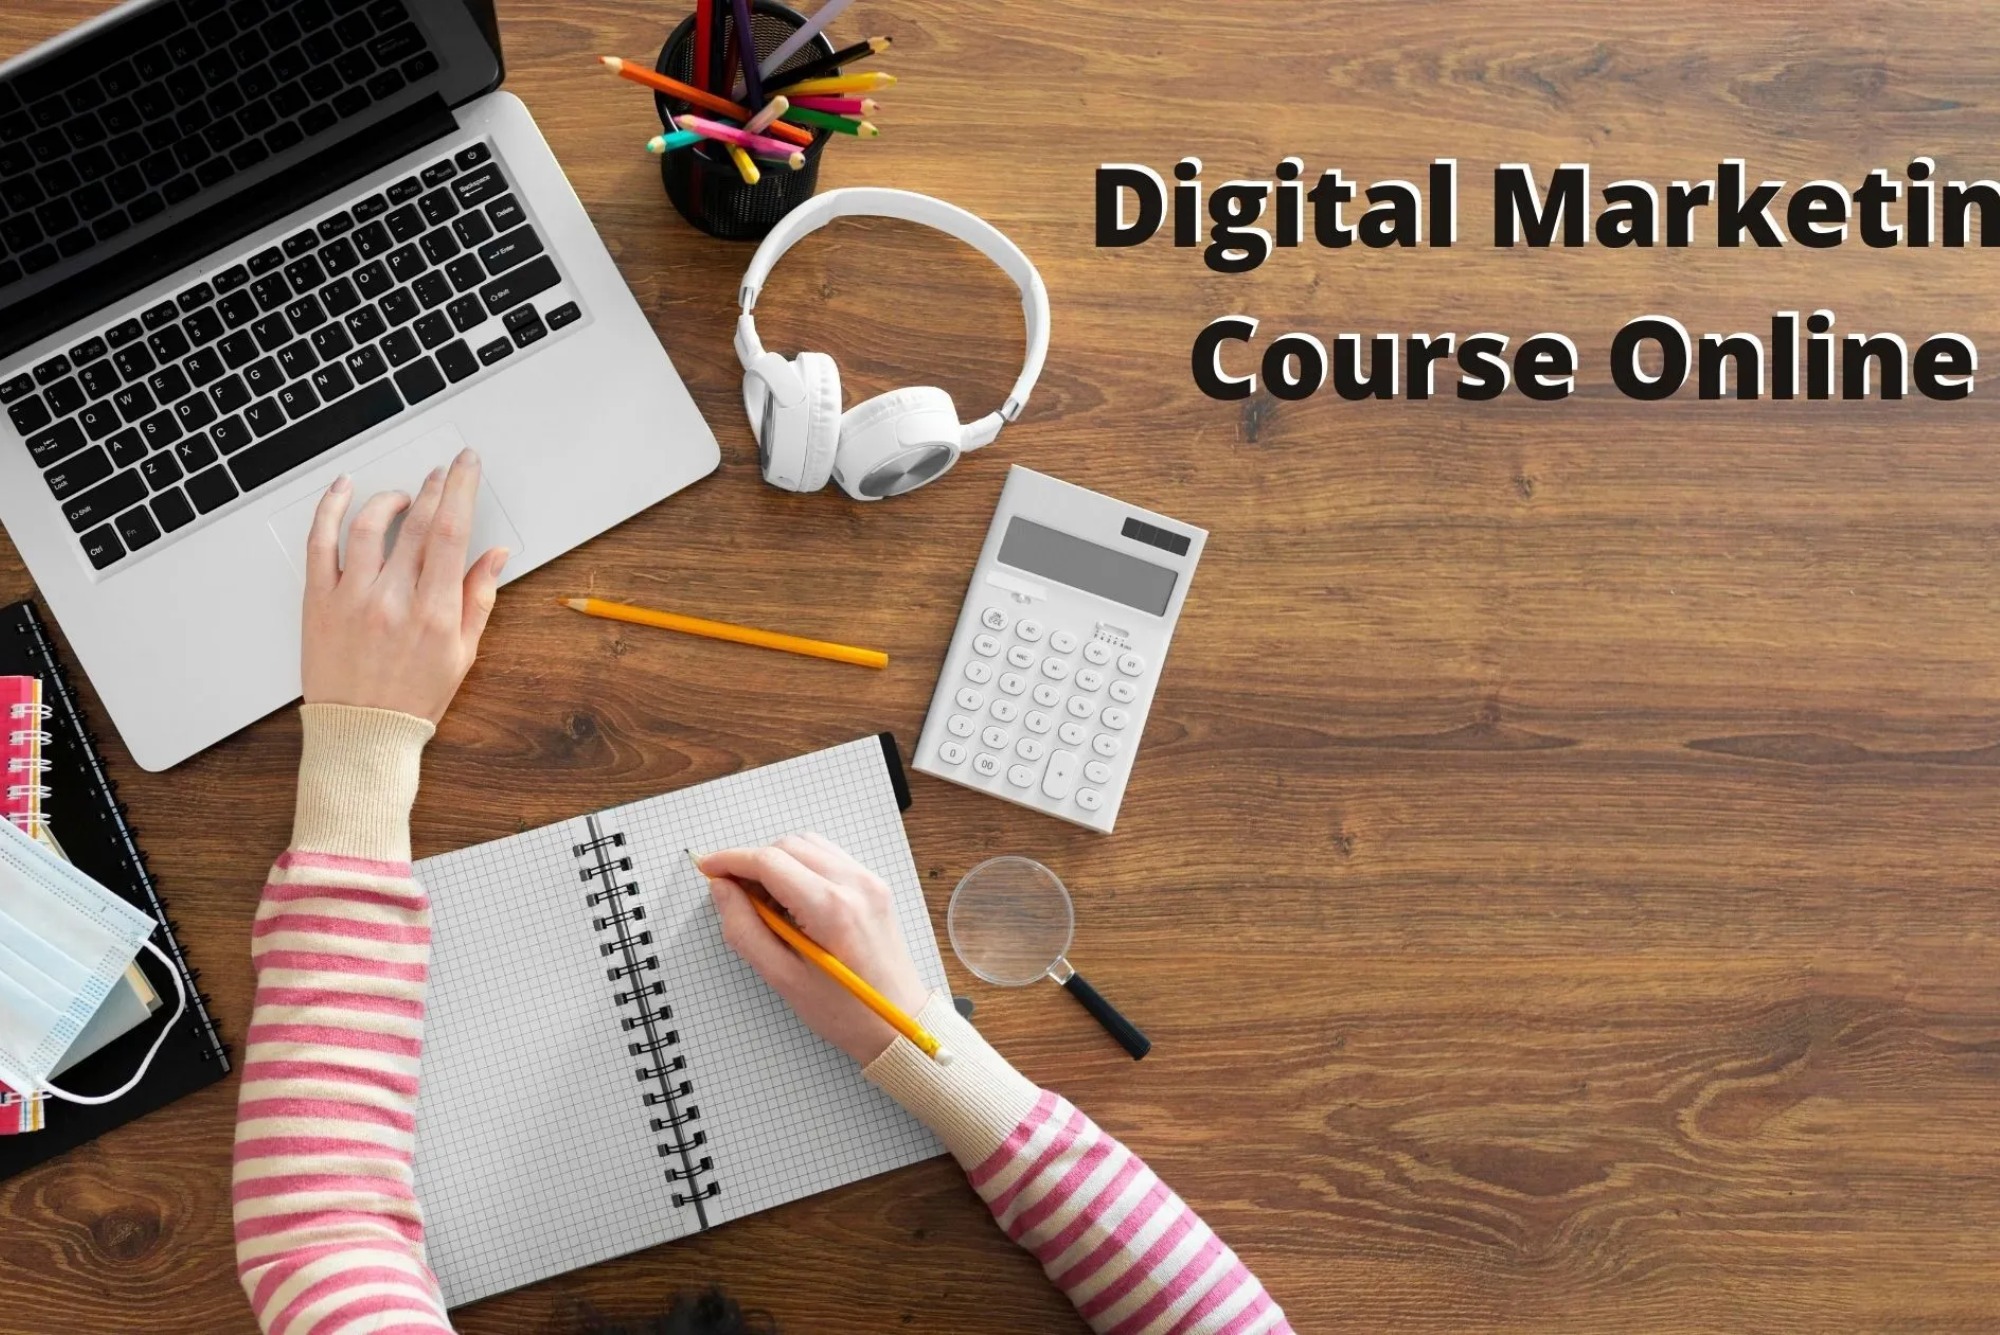 What is a Digital Marketing Course